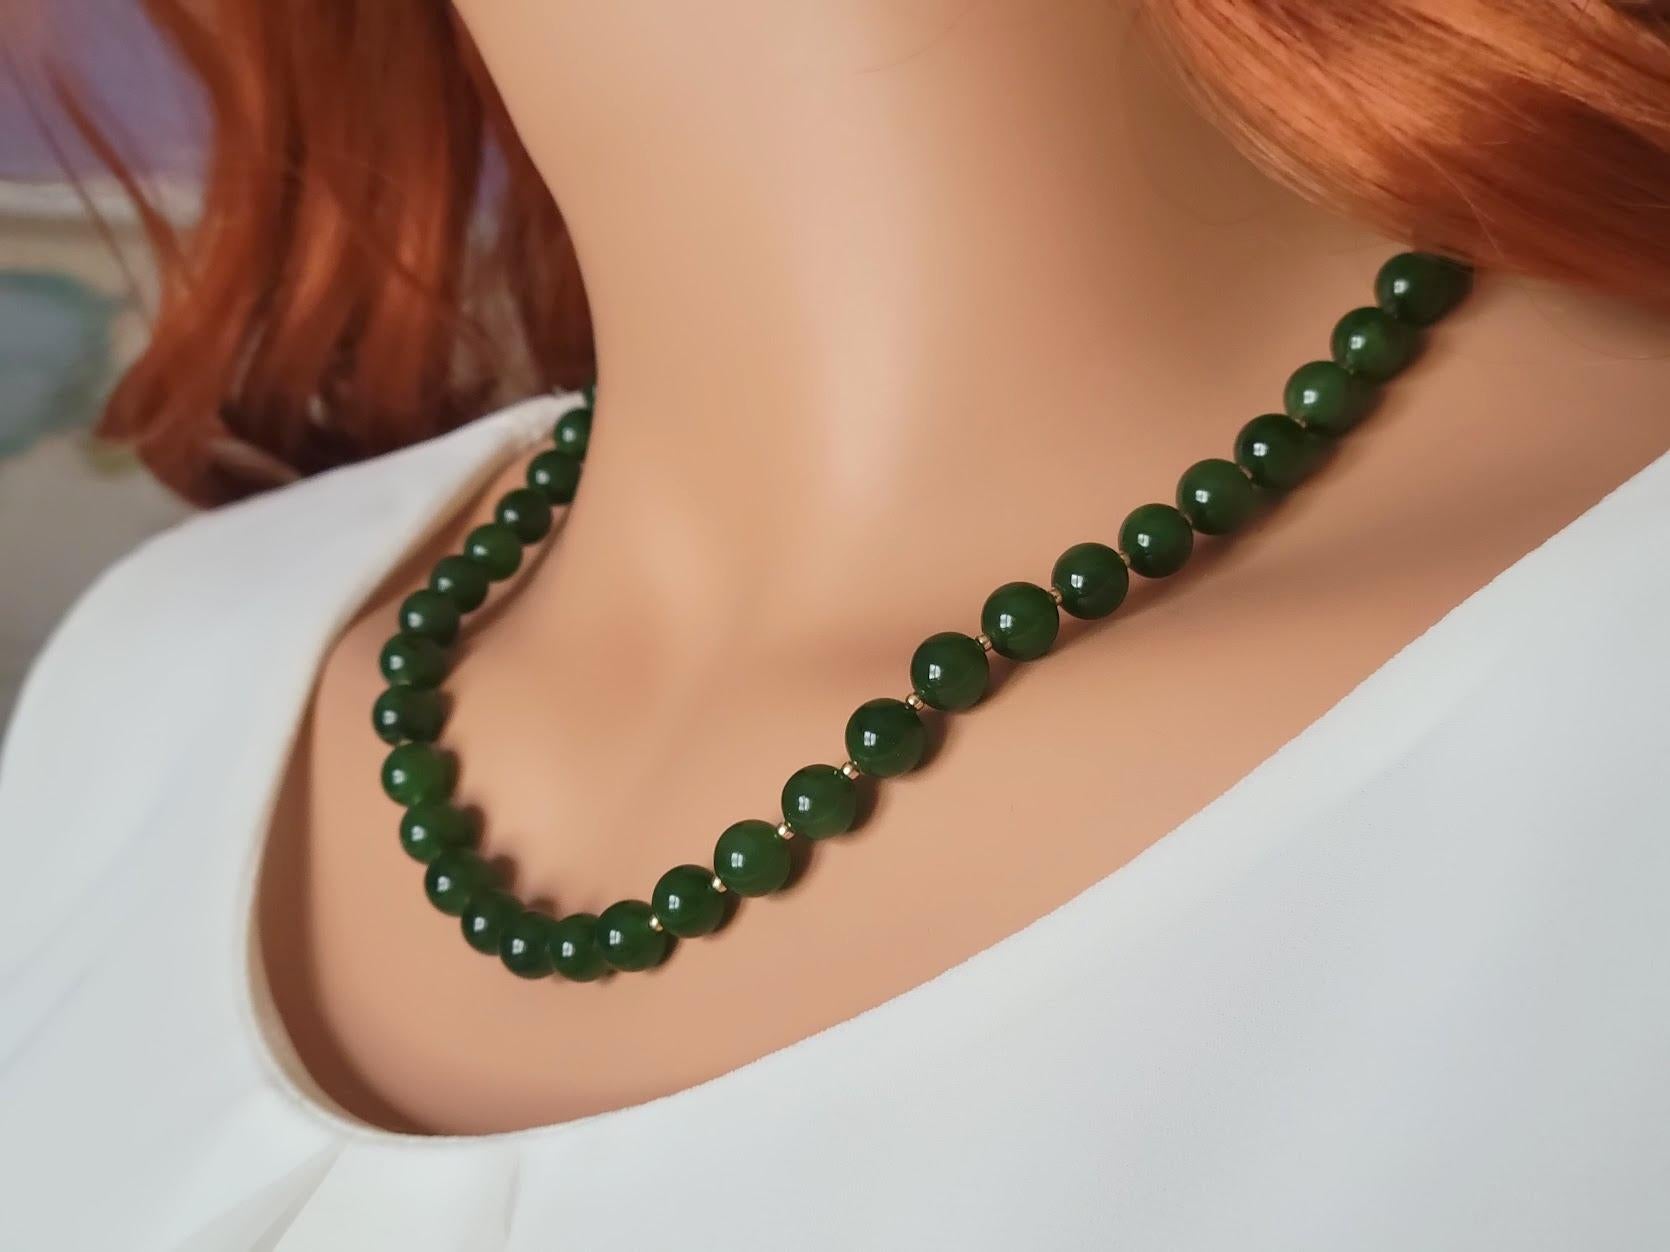 Bead Nephrite Jade Necklace with Jade Clasp For Sale